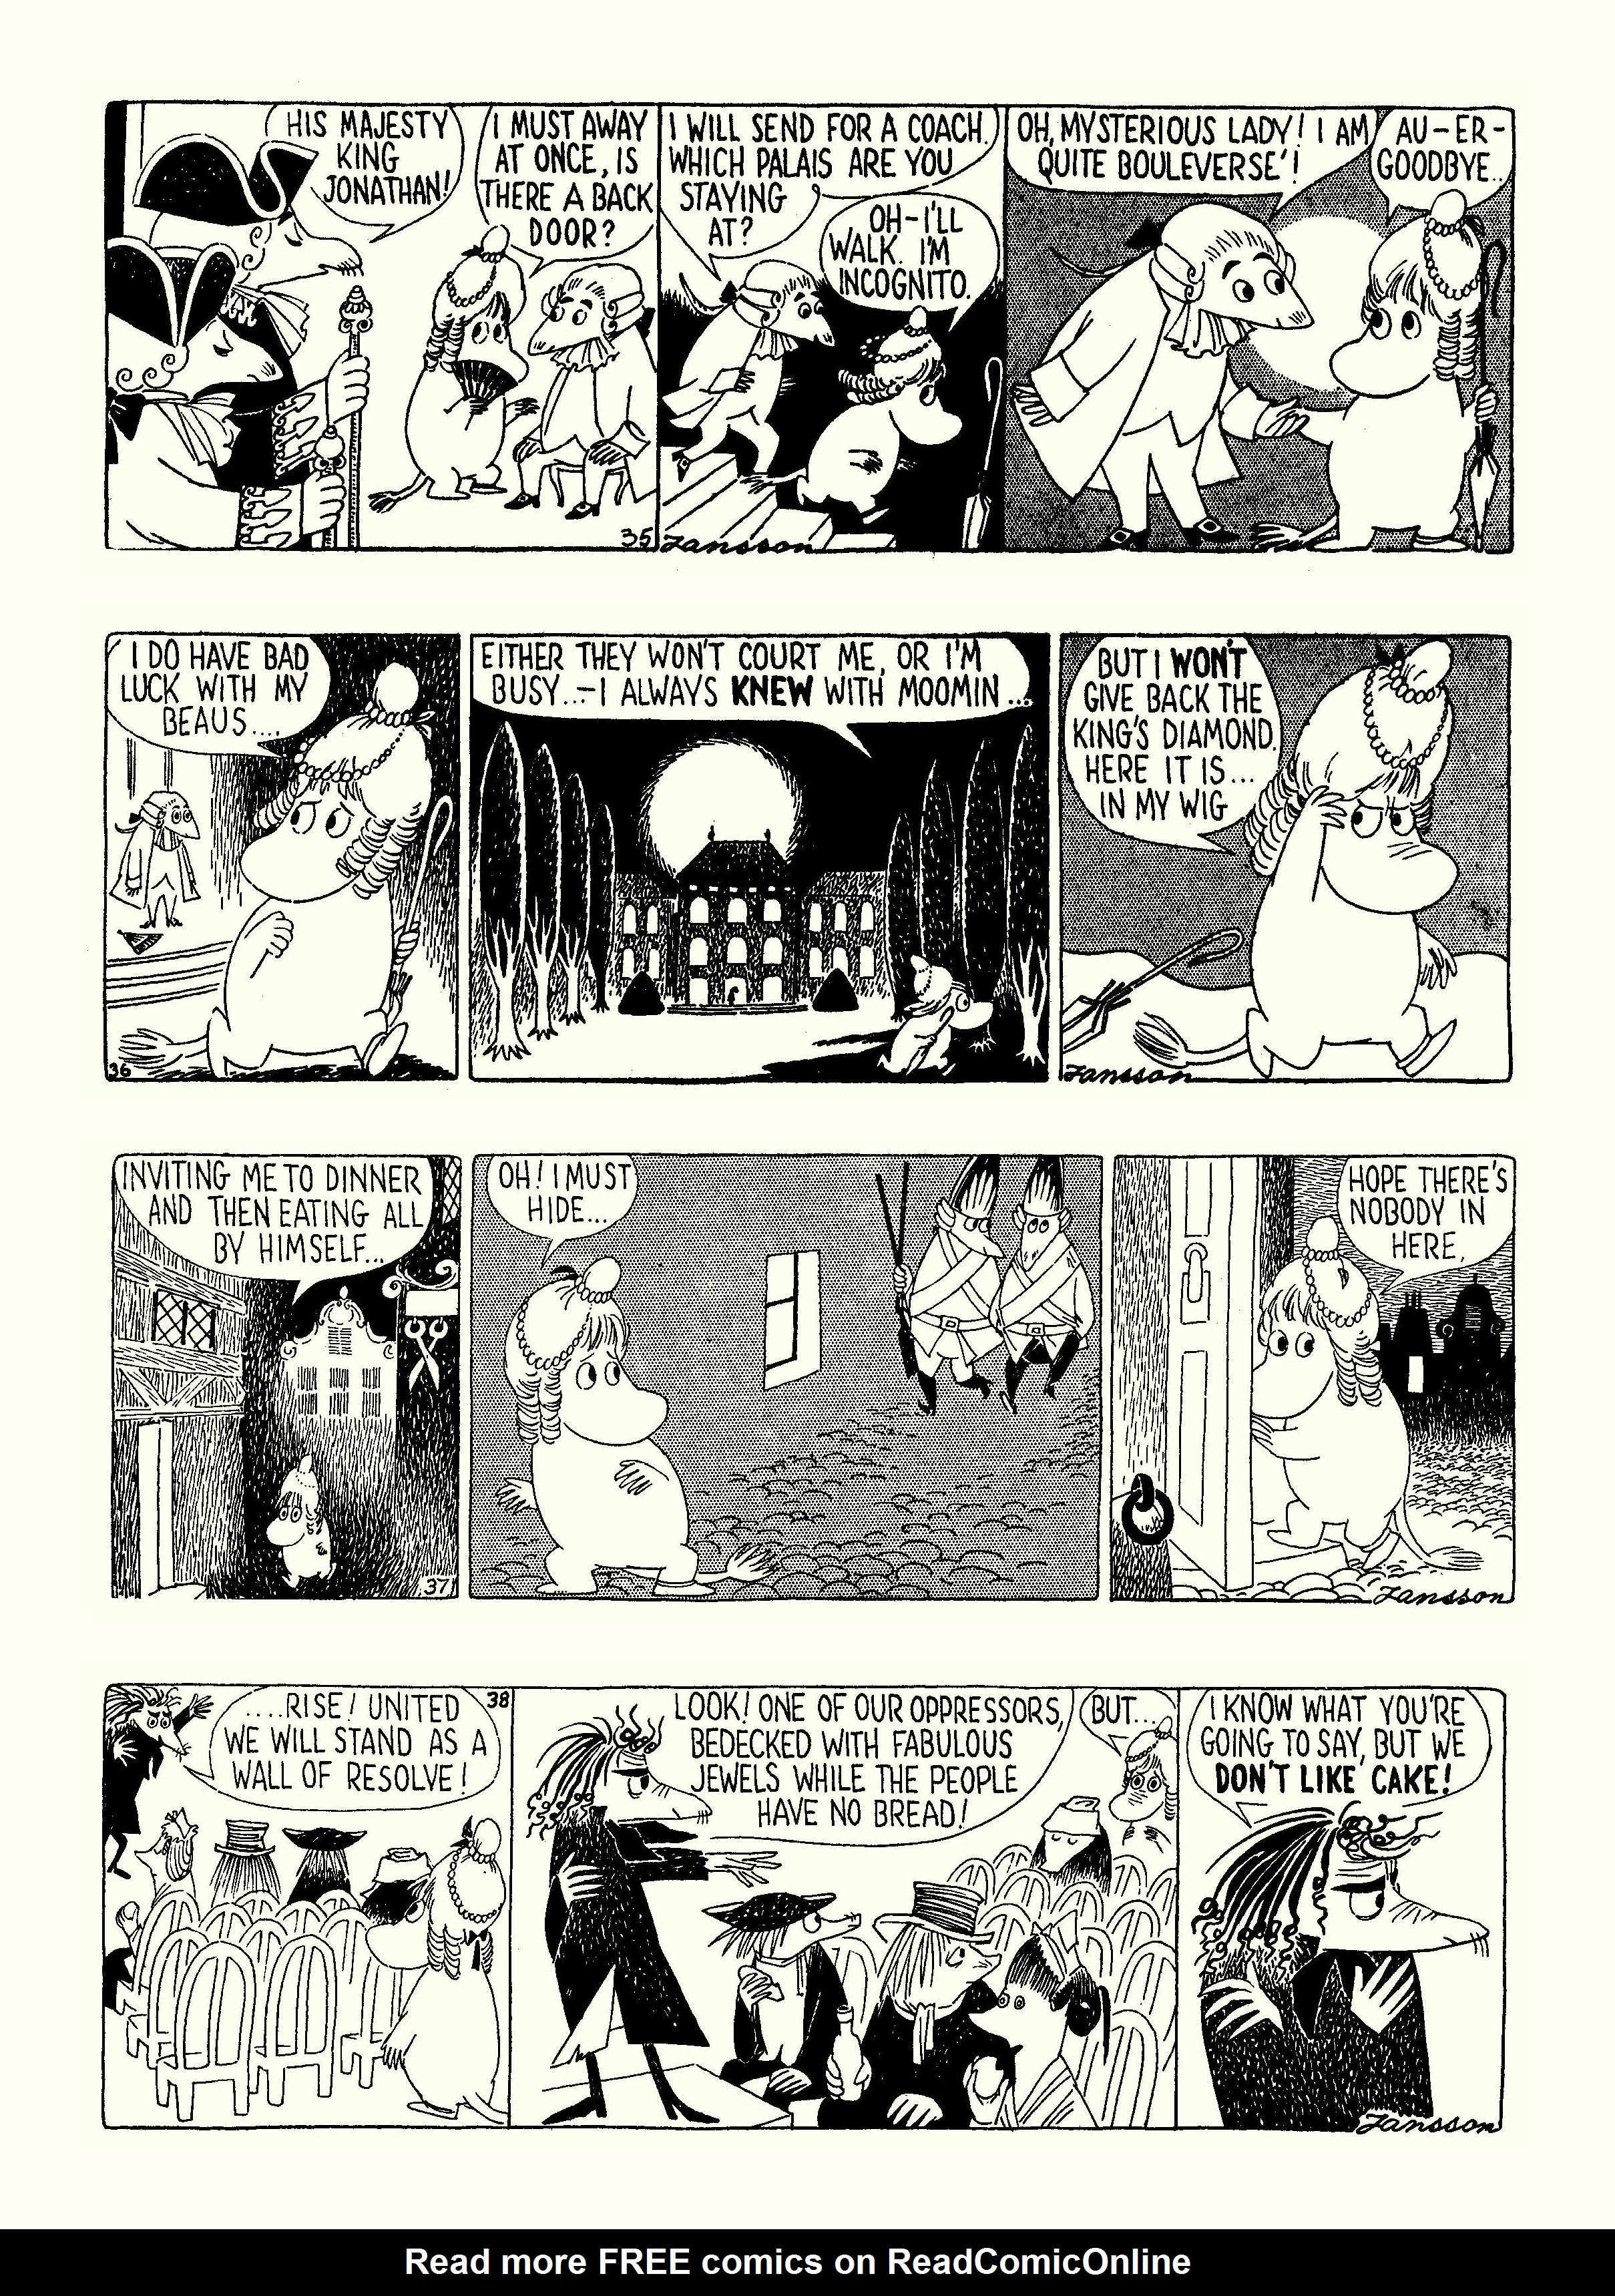 Read online Moomin: The Complete Tove Jansson Comic Strip comic -  Issue # TPB 4 - 32